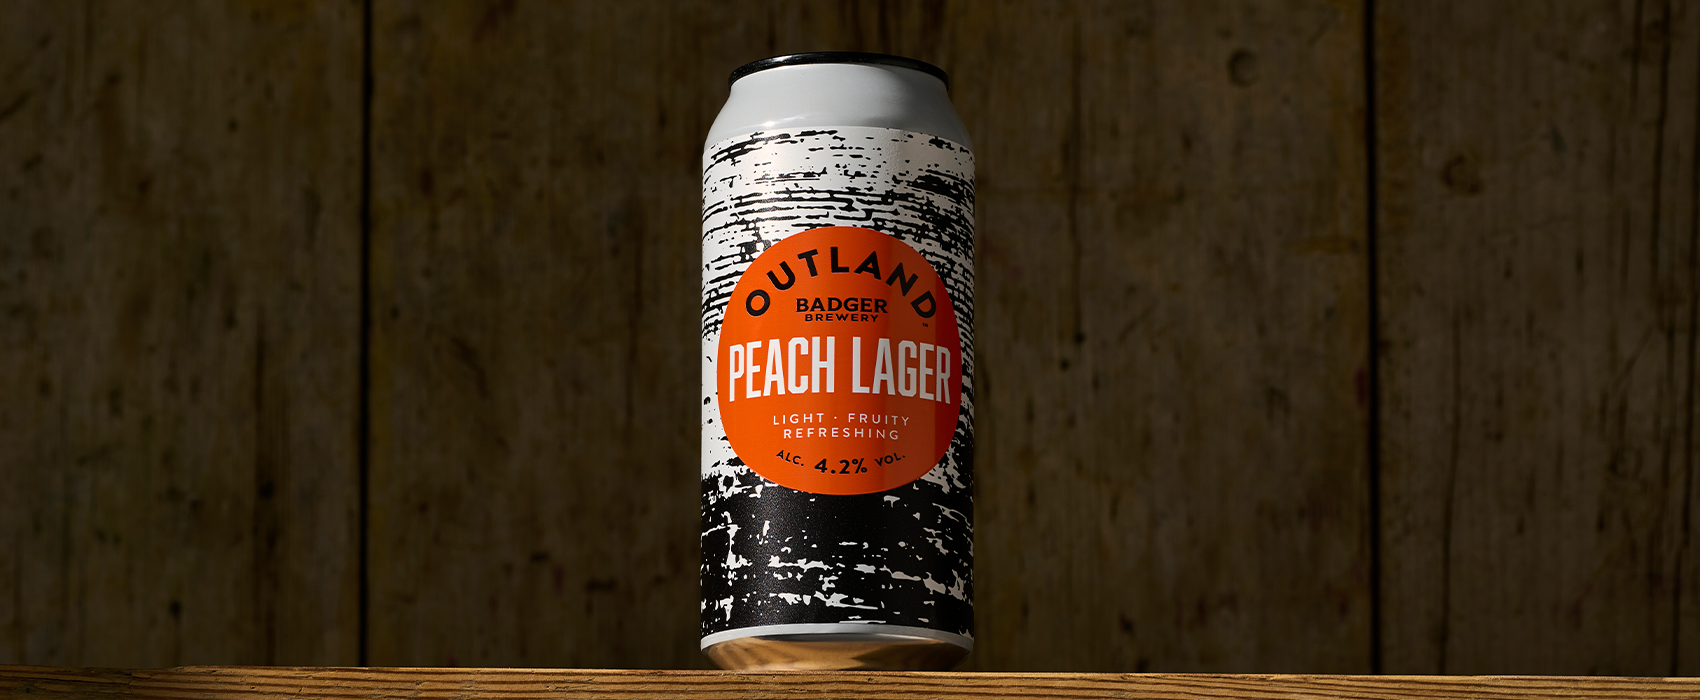 Outland by Badger Brewery Peach Lager cans